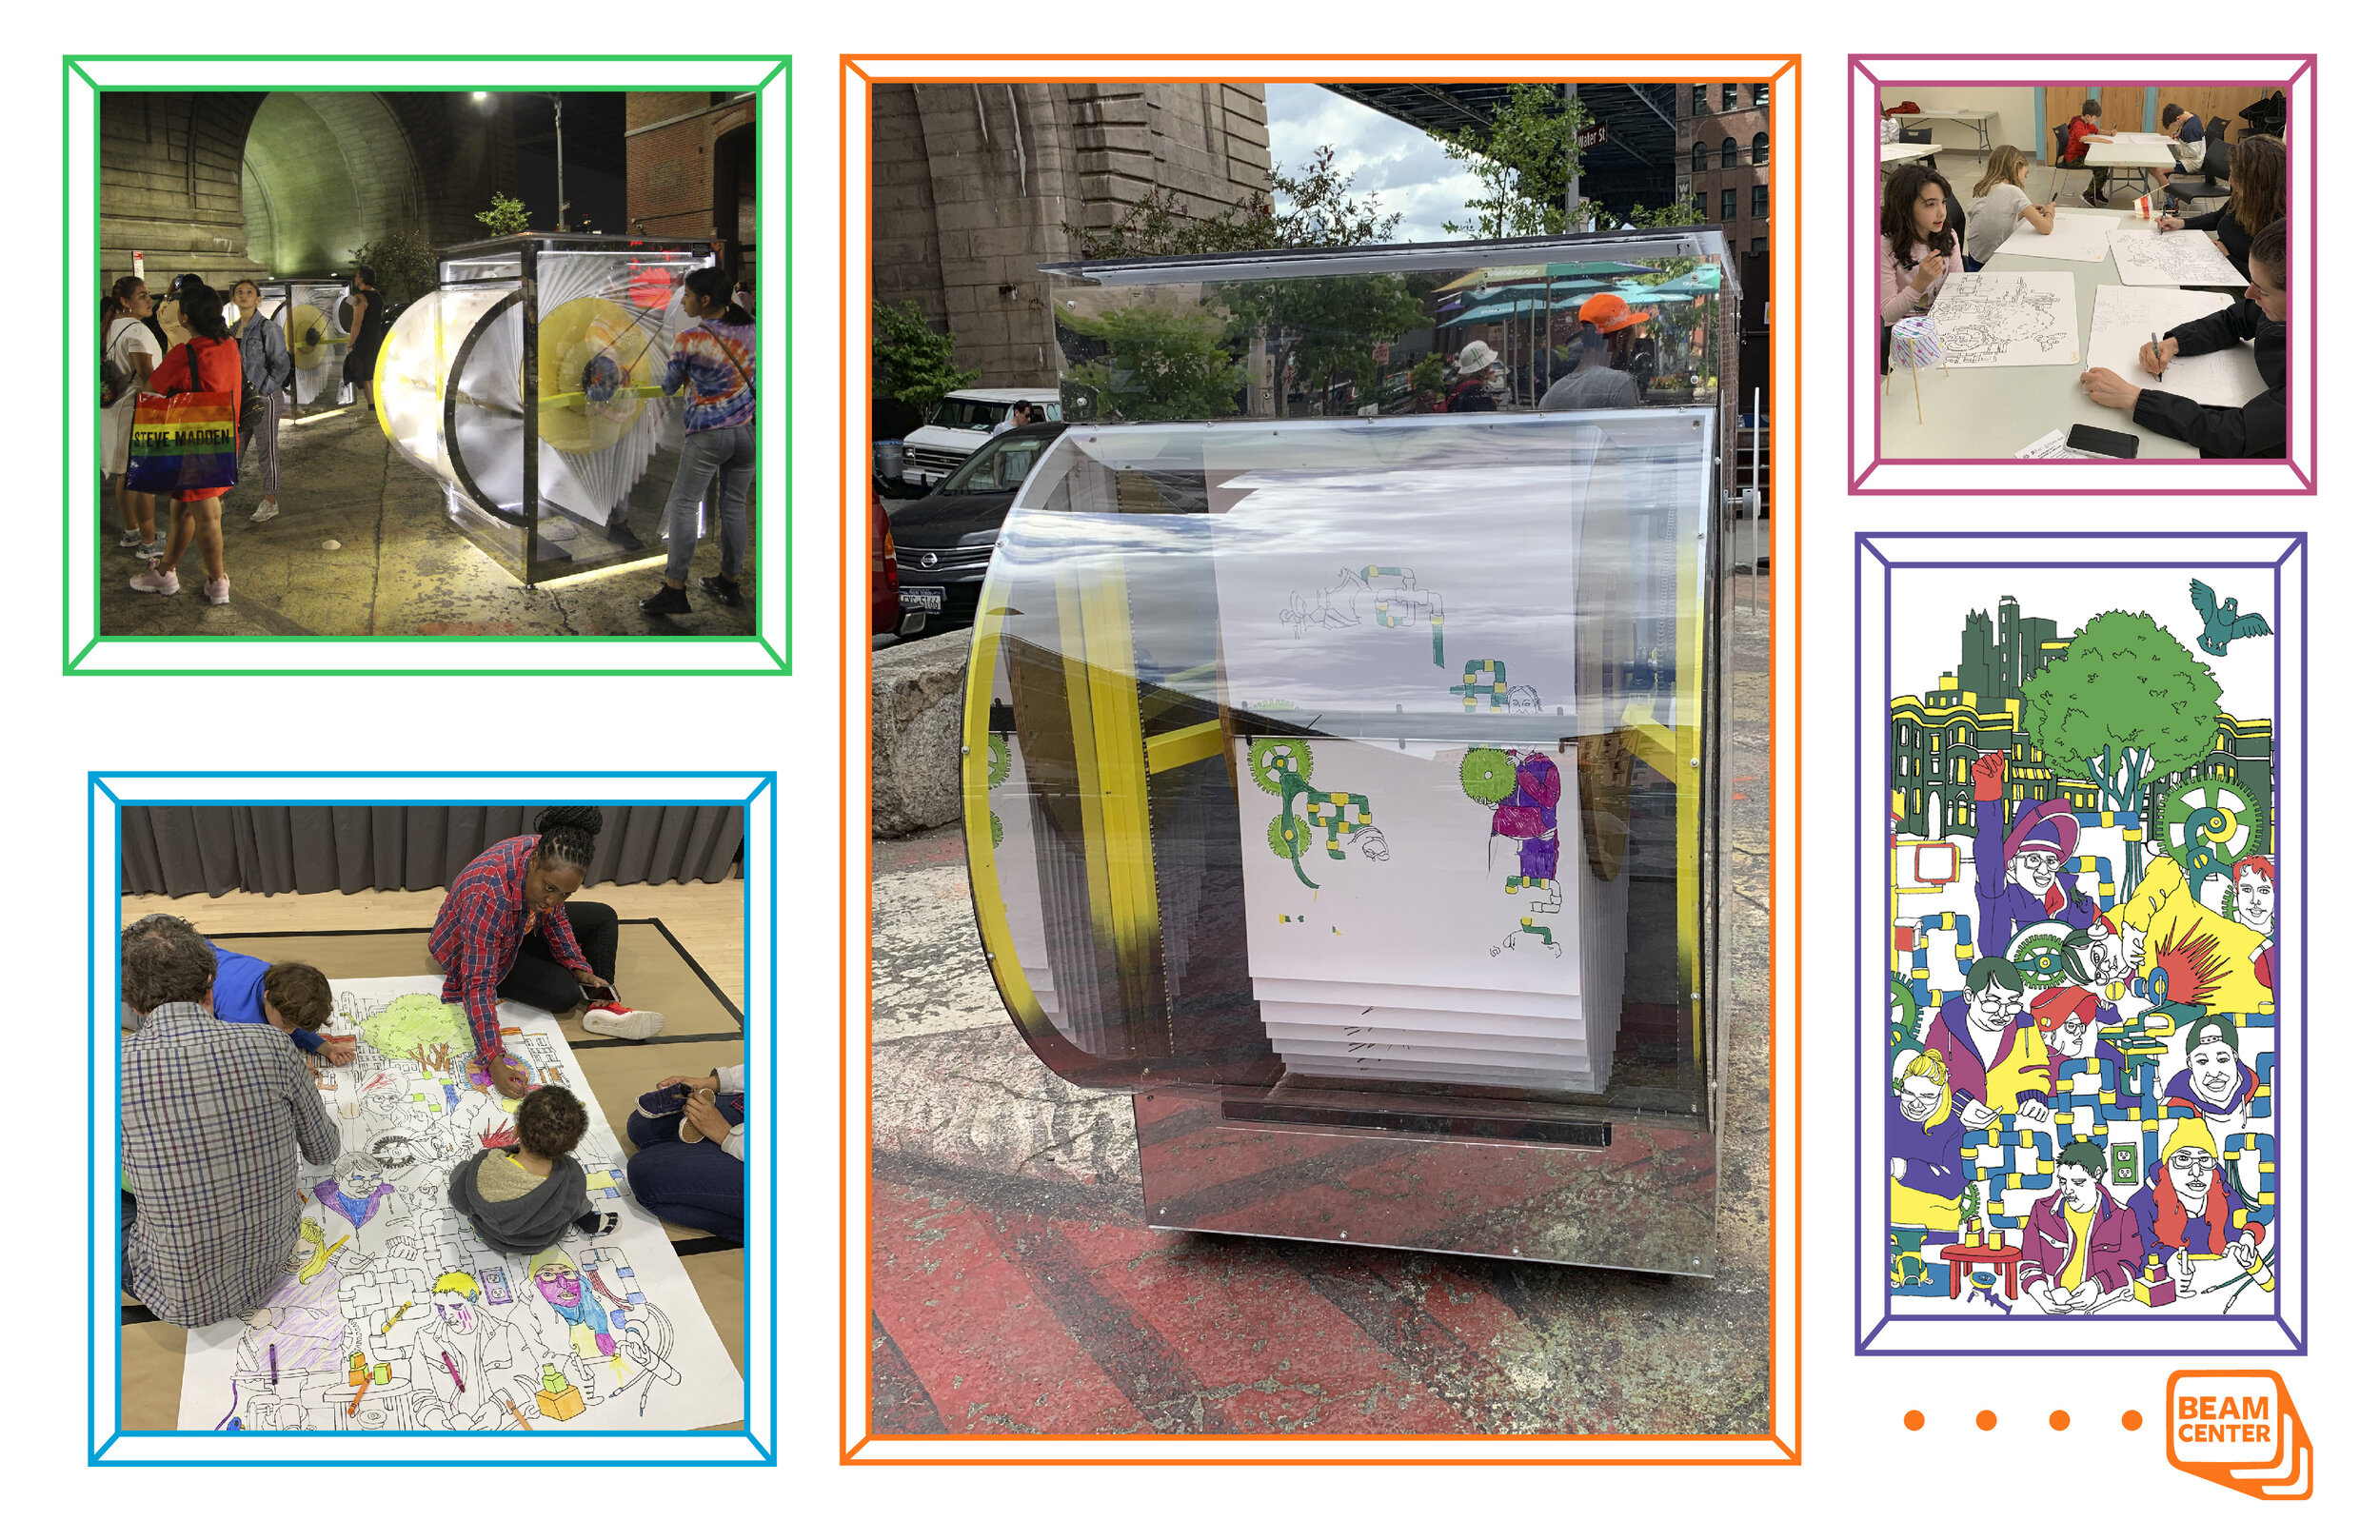  Collaborative  Beam Center  NYC Flipbook project located at the Pearl St. Triangle in Brooklyn, NY. Architect of the flip books:  Chee-Kit Lai , (Jun. 2019 - Sept. 2019). Bottom Left Image:  Beam Center Inventgenuity Festival  at the Dock Street Sch